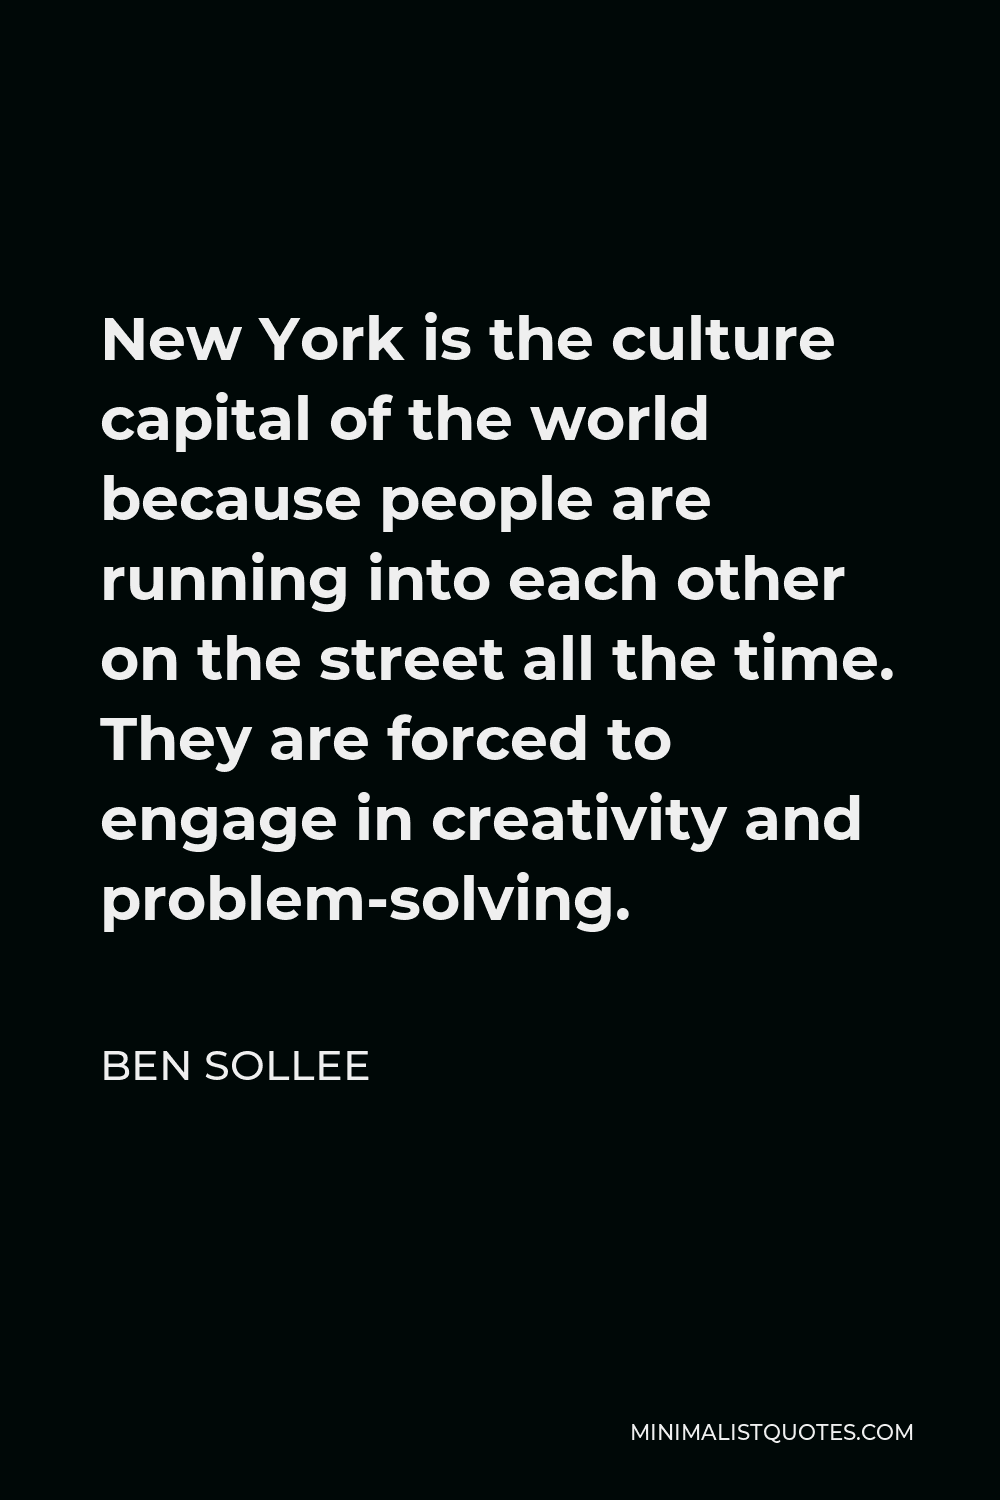 Ben Sollee Quote - New York is the culture capital of the world because people are running into each other on the street all the time. They are forced to engage in creativity and problem-solving.